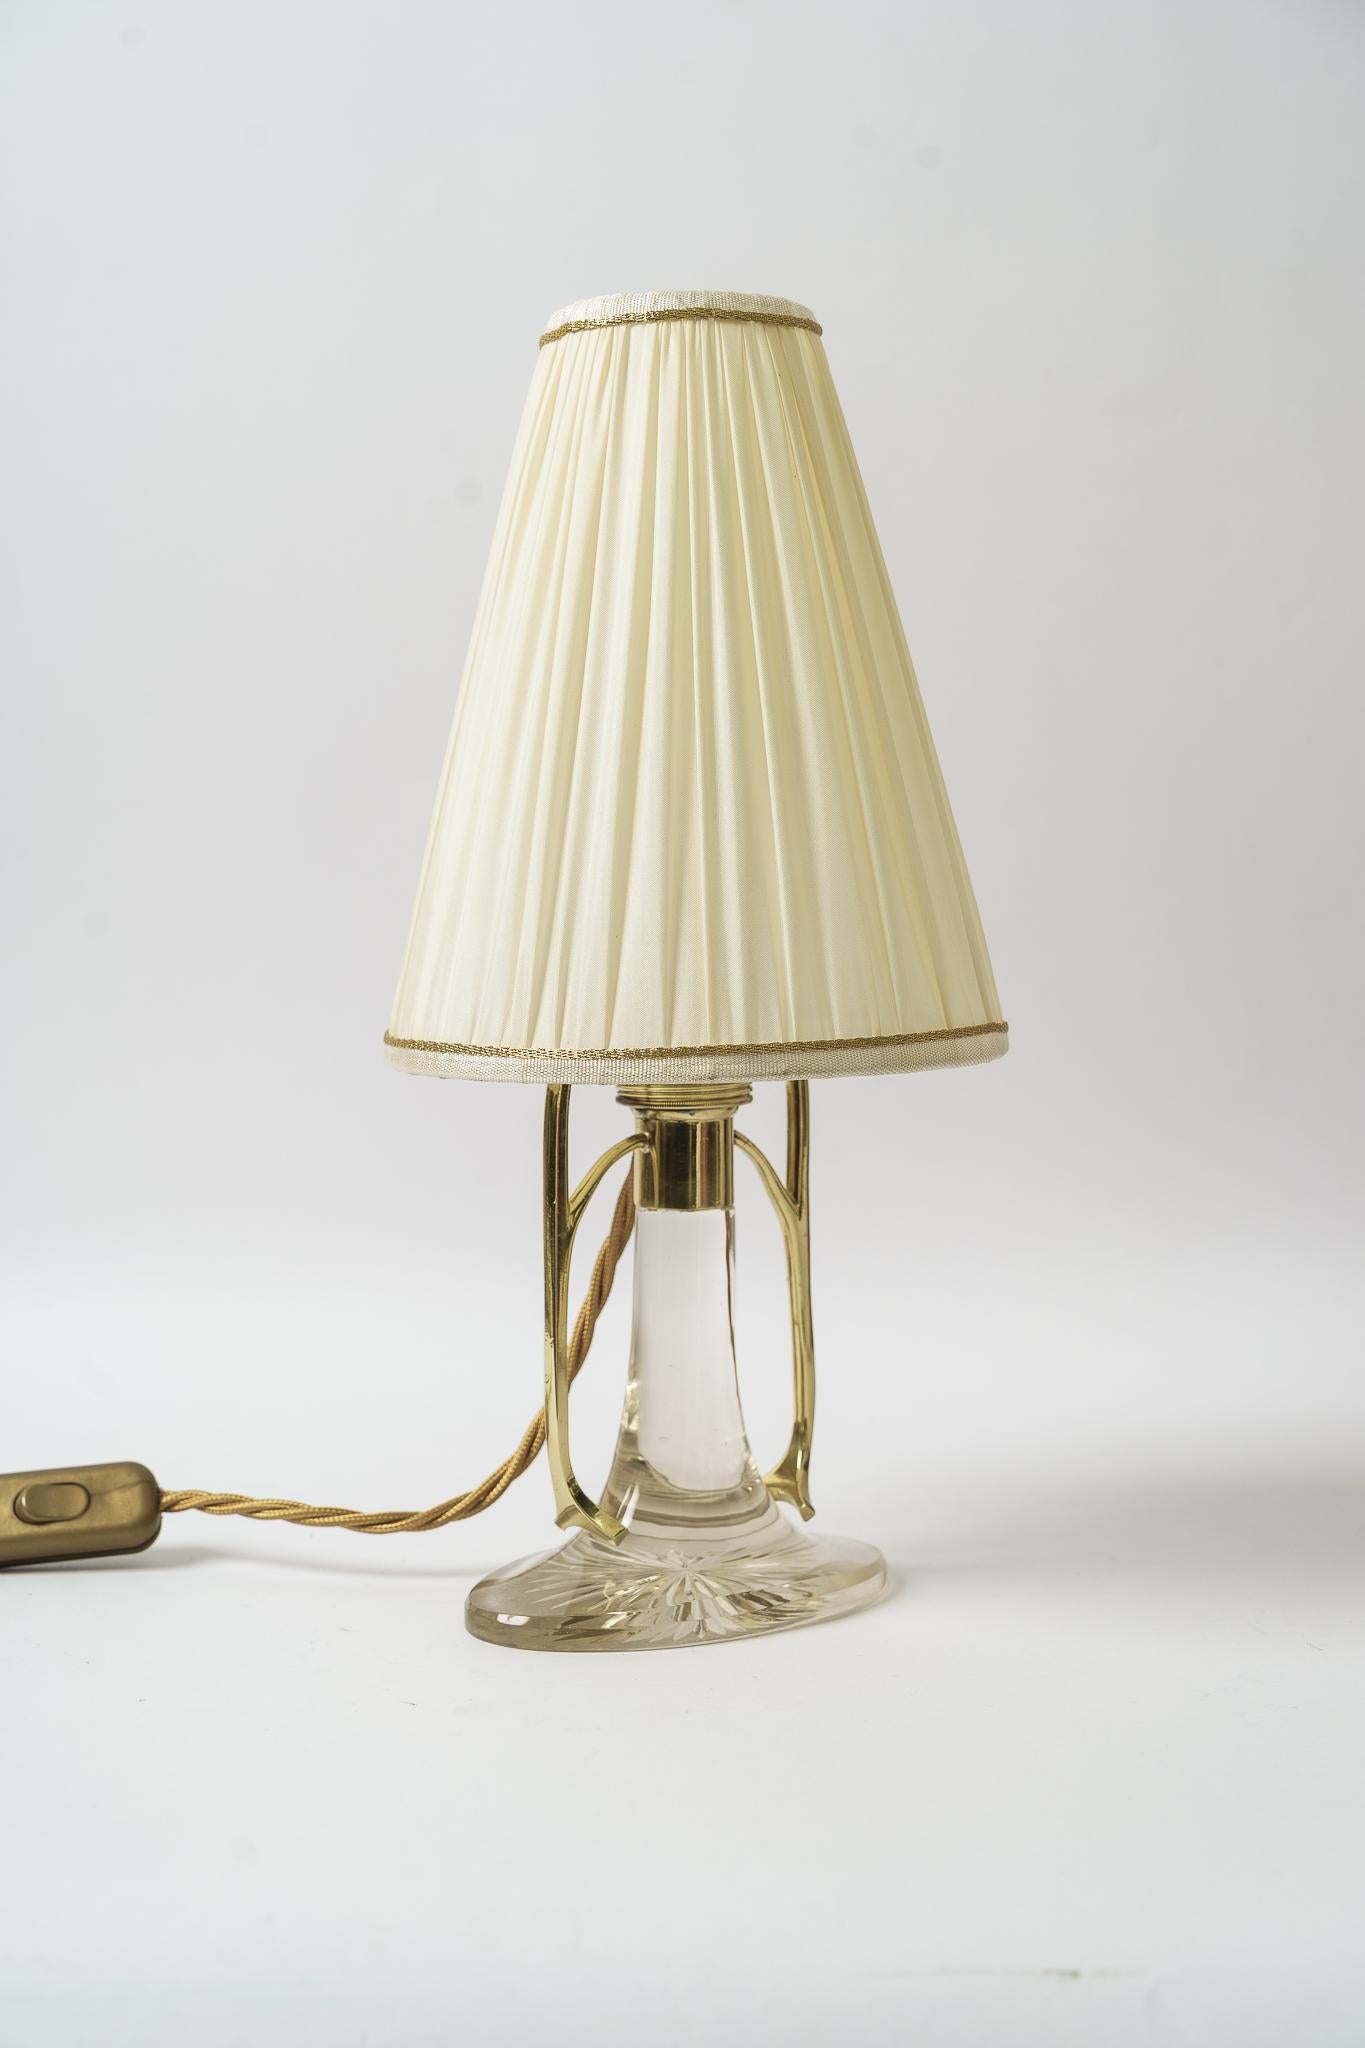 Austrian Rare Art Deco Glass Table Lamp with Fabric Shade Vienna Around 1920s For Sale